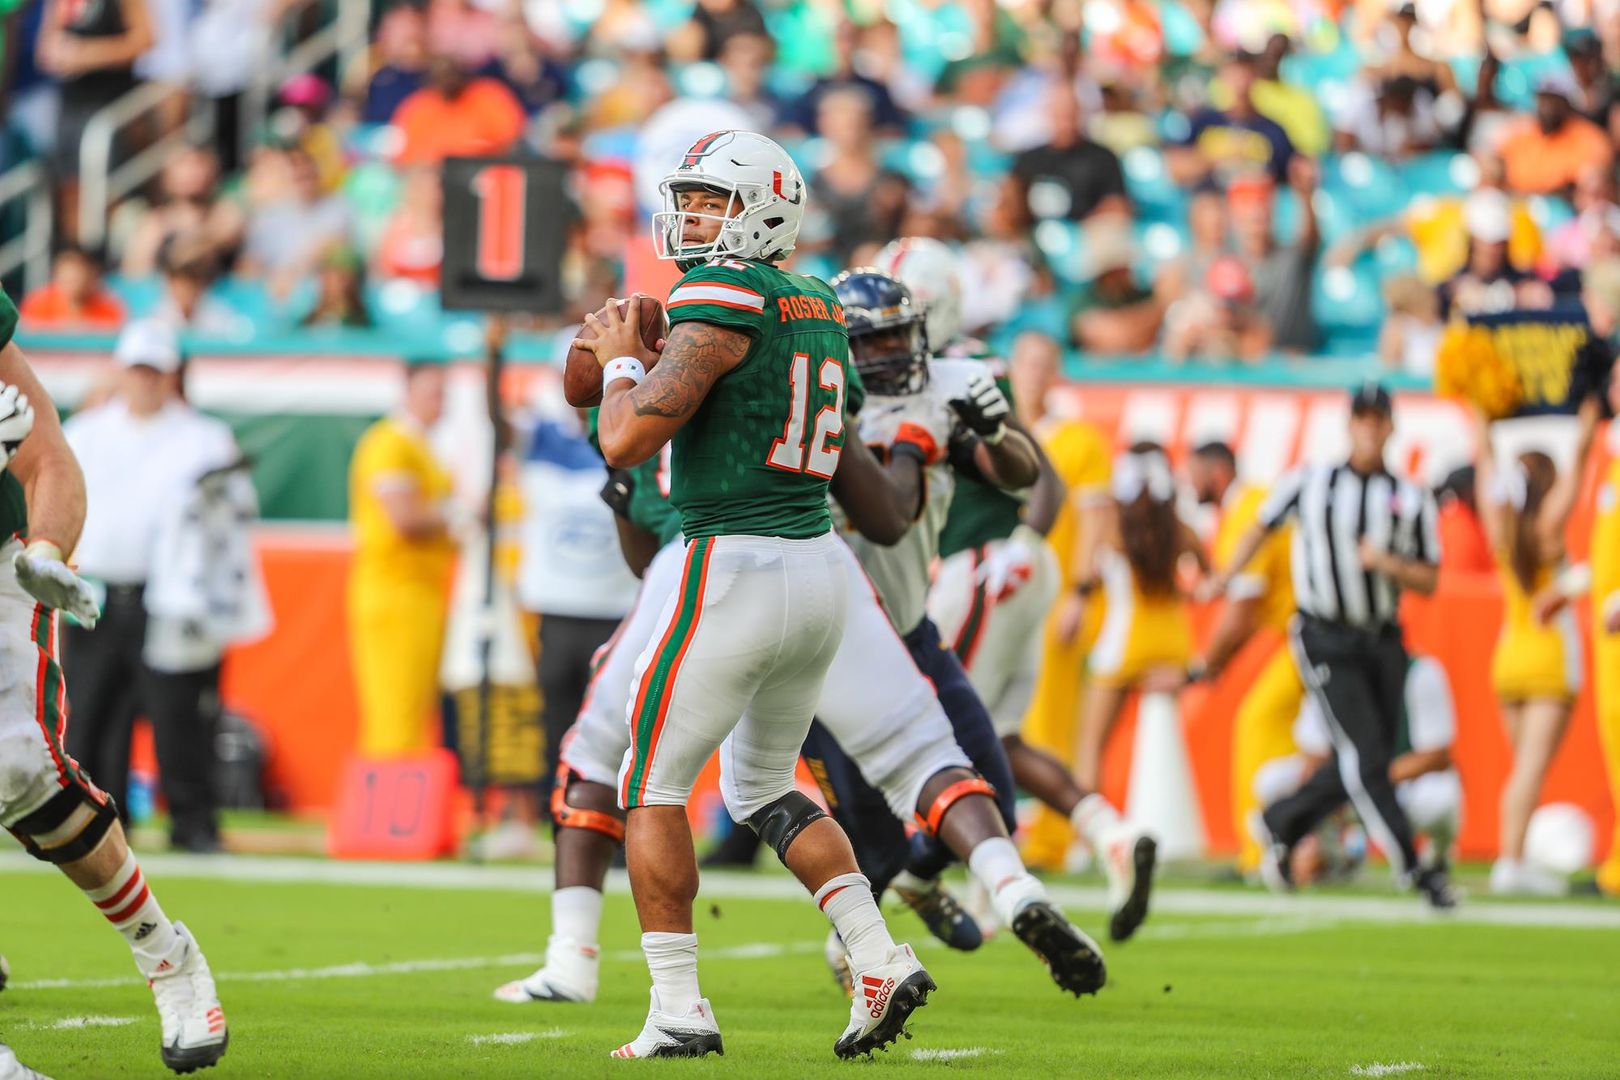 Miami's Offense Hopes to Maximize Opportunities